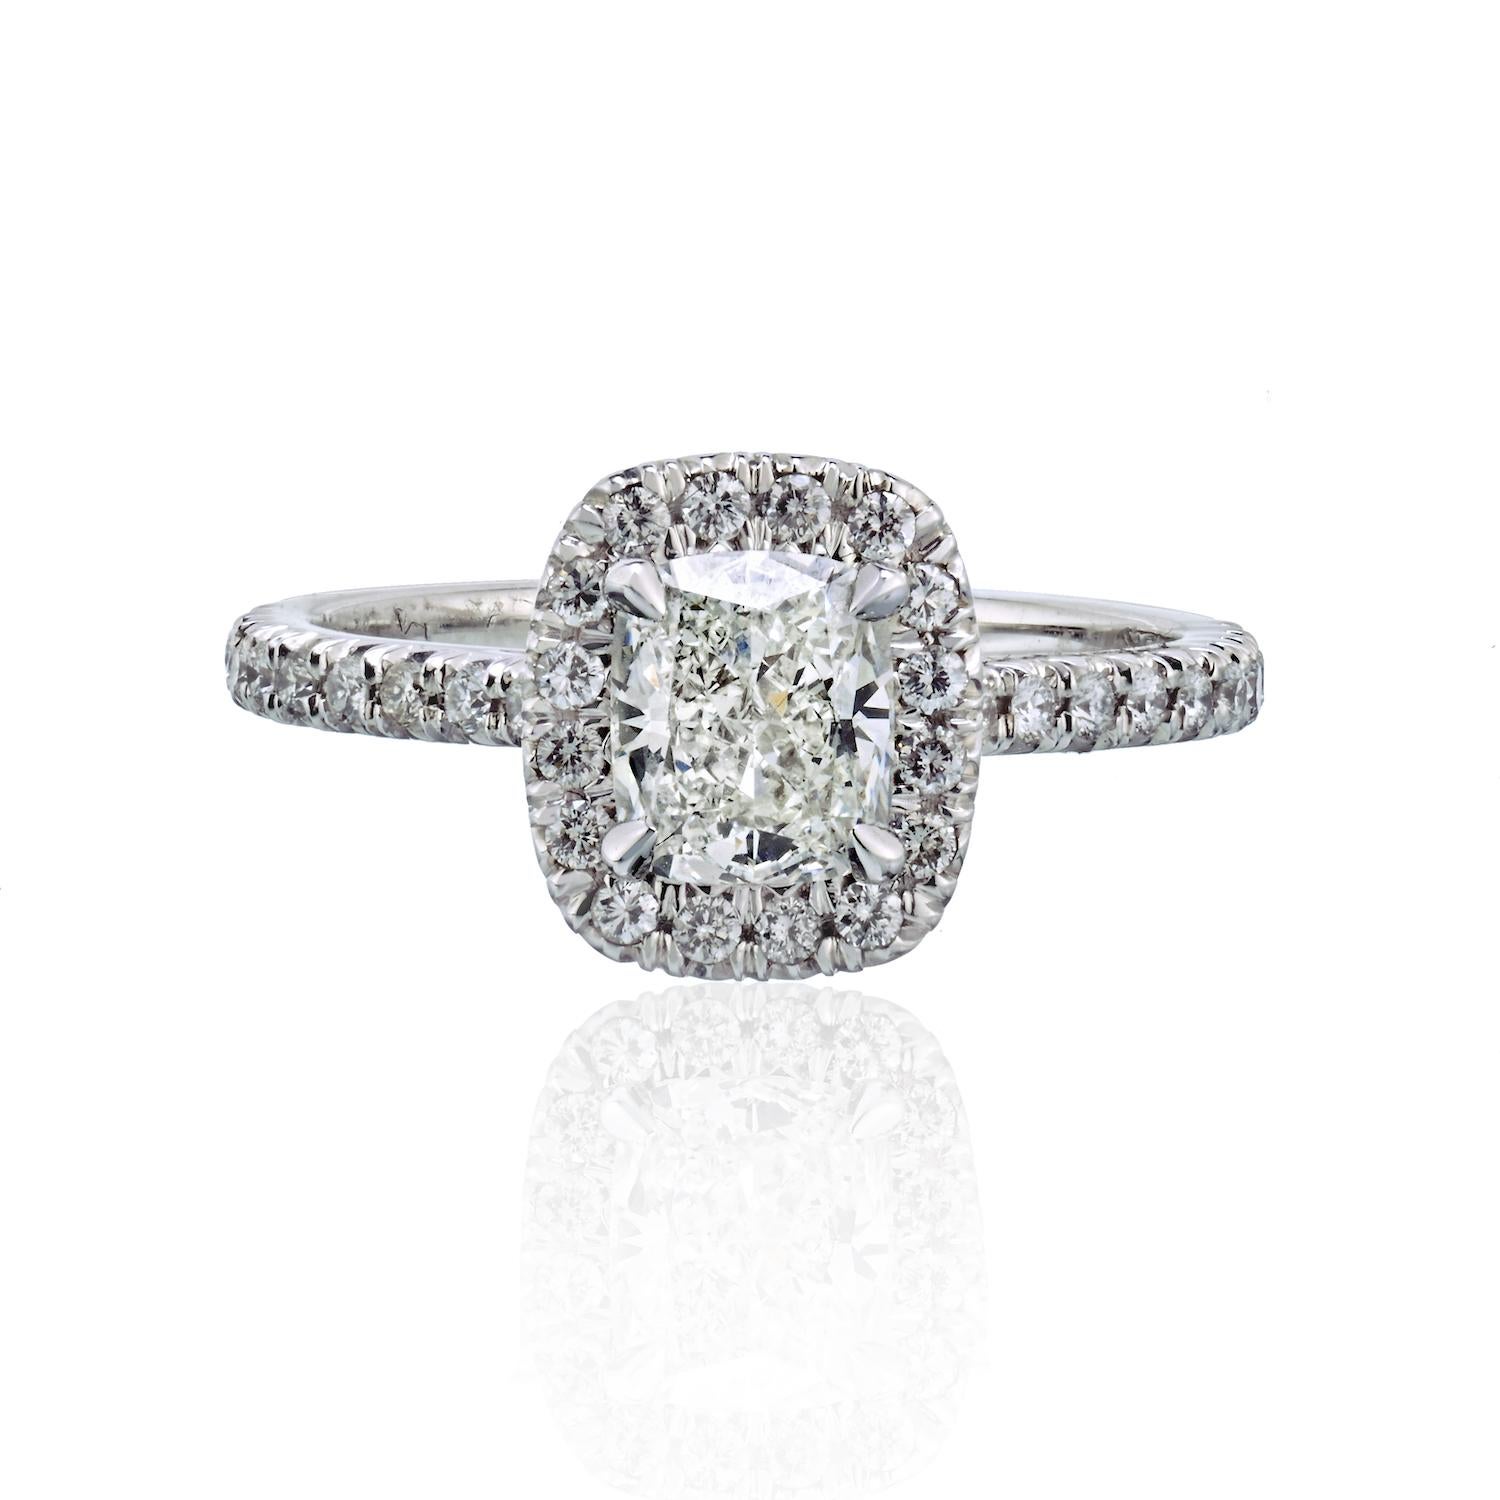 Engagement Cushion Cut Diamond Halo Ring 18K White Gold 1.06Cttw For Sale 1